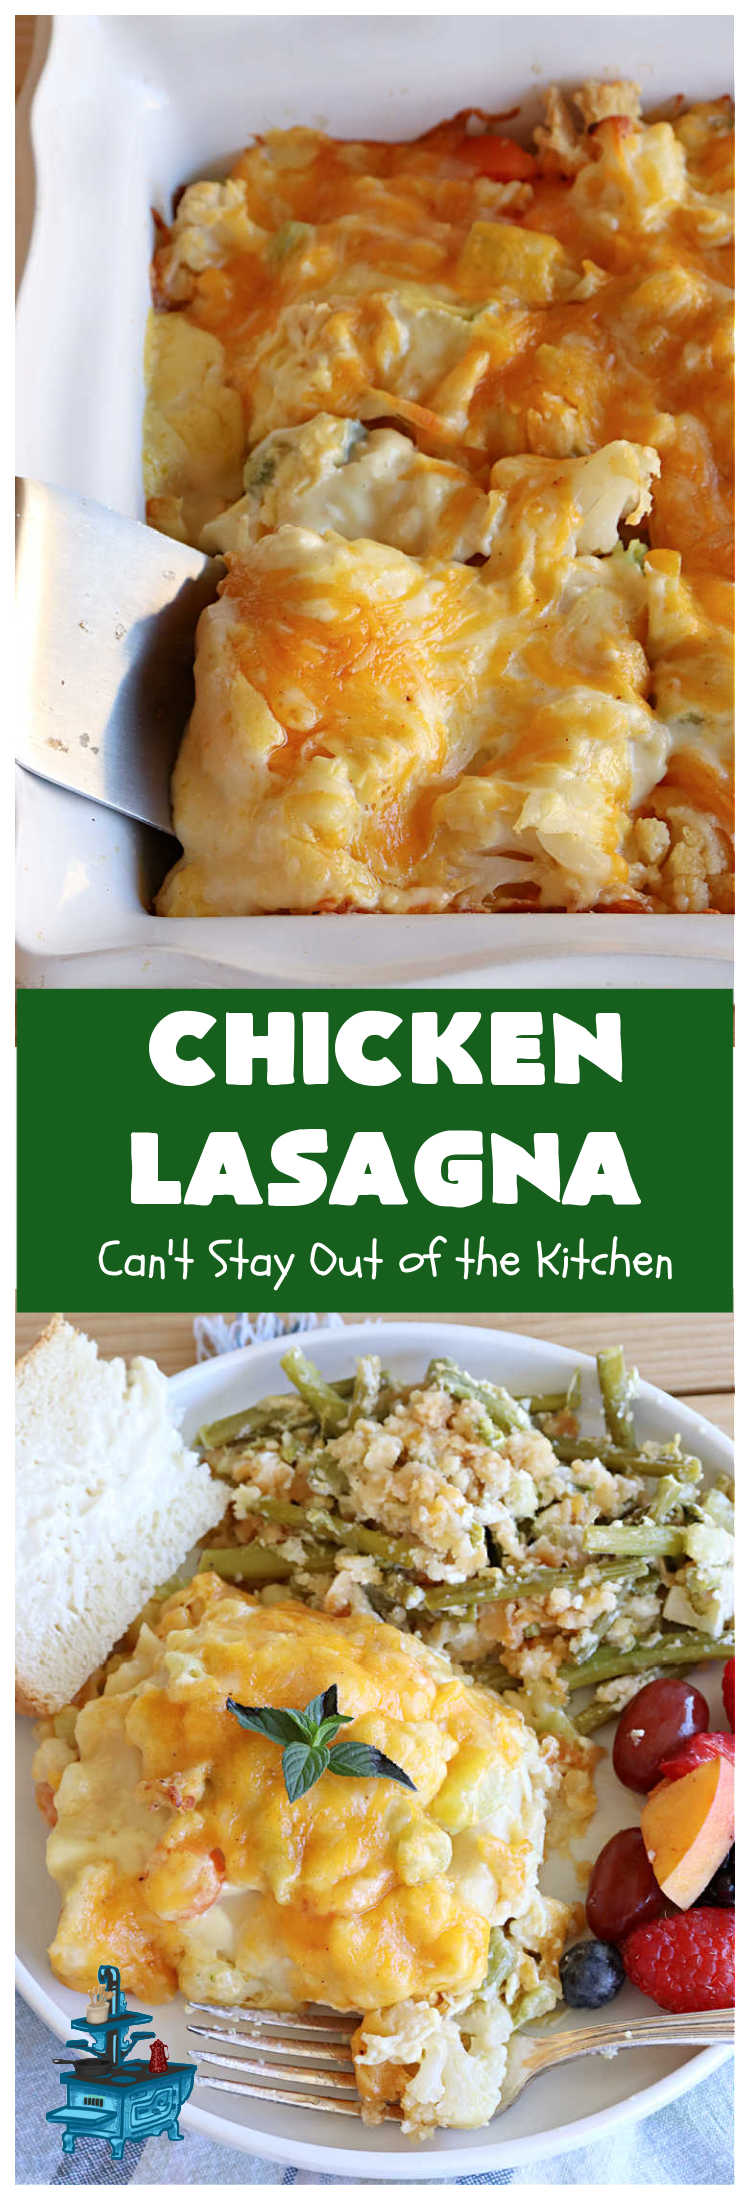 Chicken Lasagna | Can't Stay Out of the Kitchen | this extra cheesy #lasagna #recipe includes #chicken & a mixed #vegetable blend of #broccoli, #cauliflower & #carrots. The #cheese sauce includes #CreamOfChickenSoup! It's delightful for company dinners as everyone is sure to want seconds. #casserole #noodles #pasta #ChickenLasagna